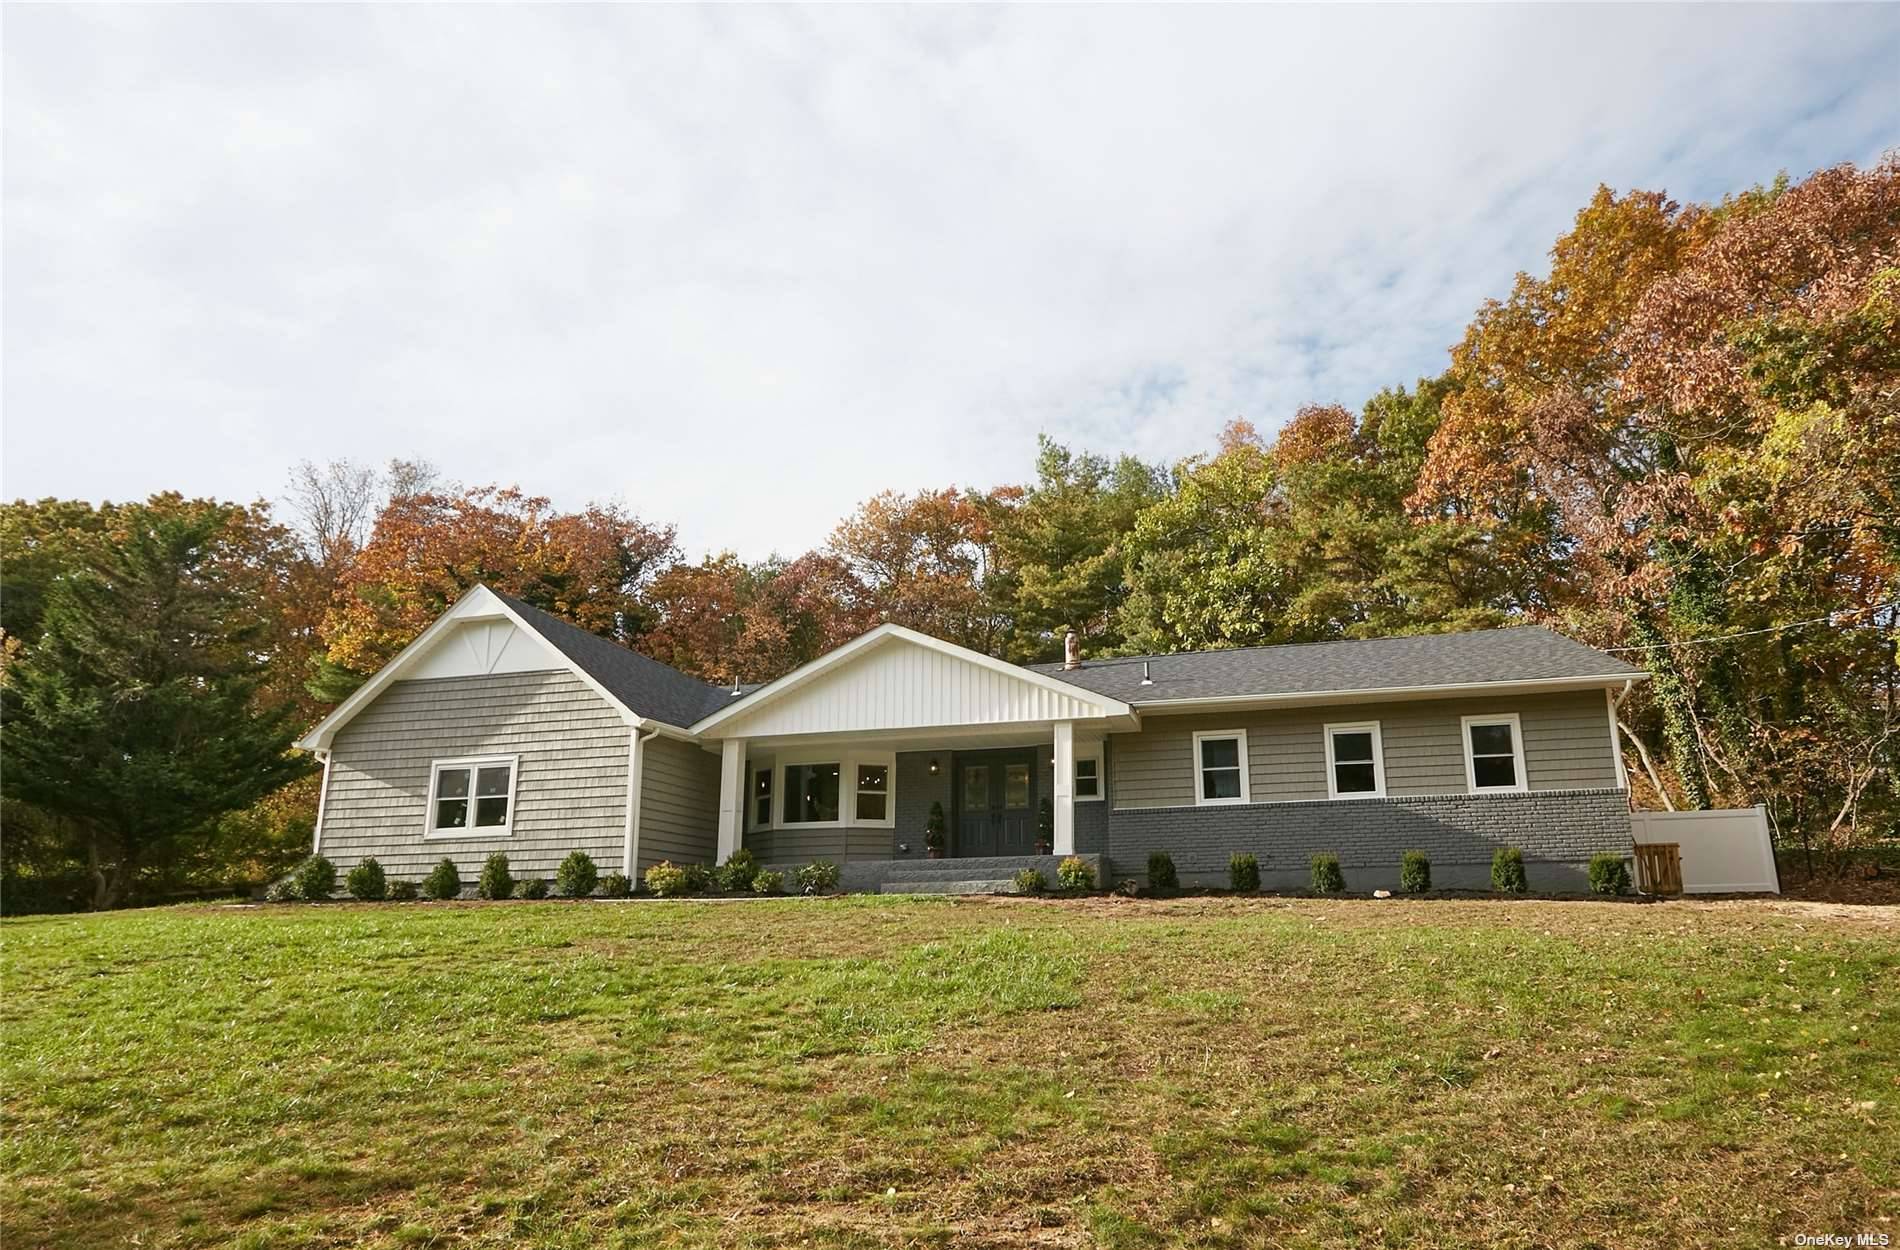 Classic ranch on a private 2 acre lot with in ground pool and full finished basement.